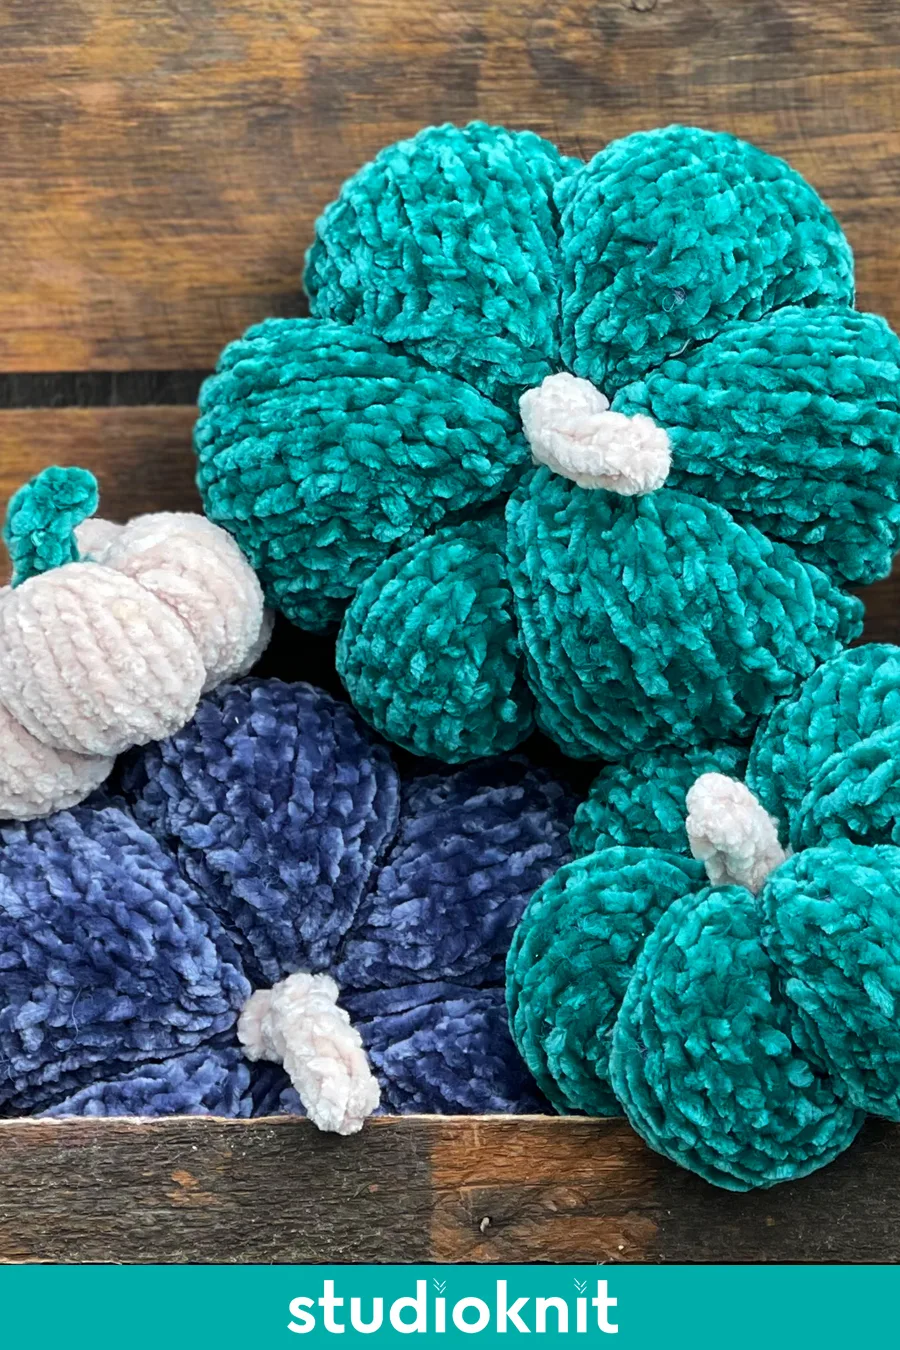 Velvet knitted pumpkins stacked atop each other in blue, green, and white yarn colors